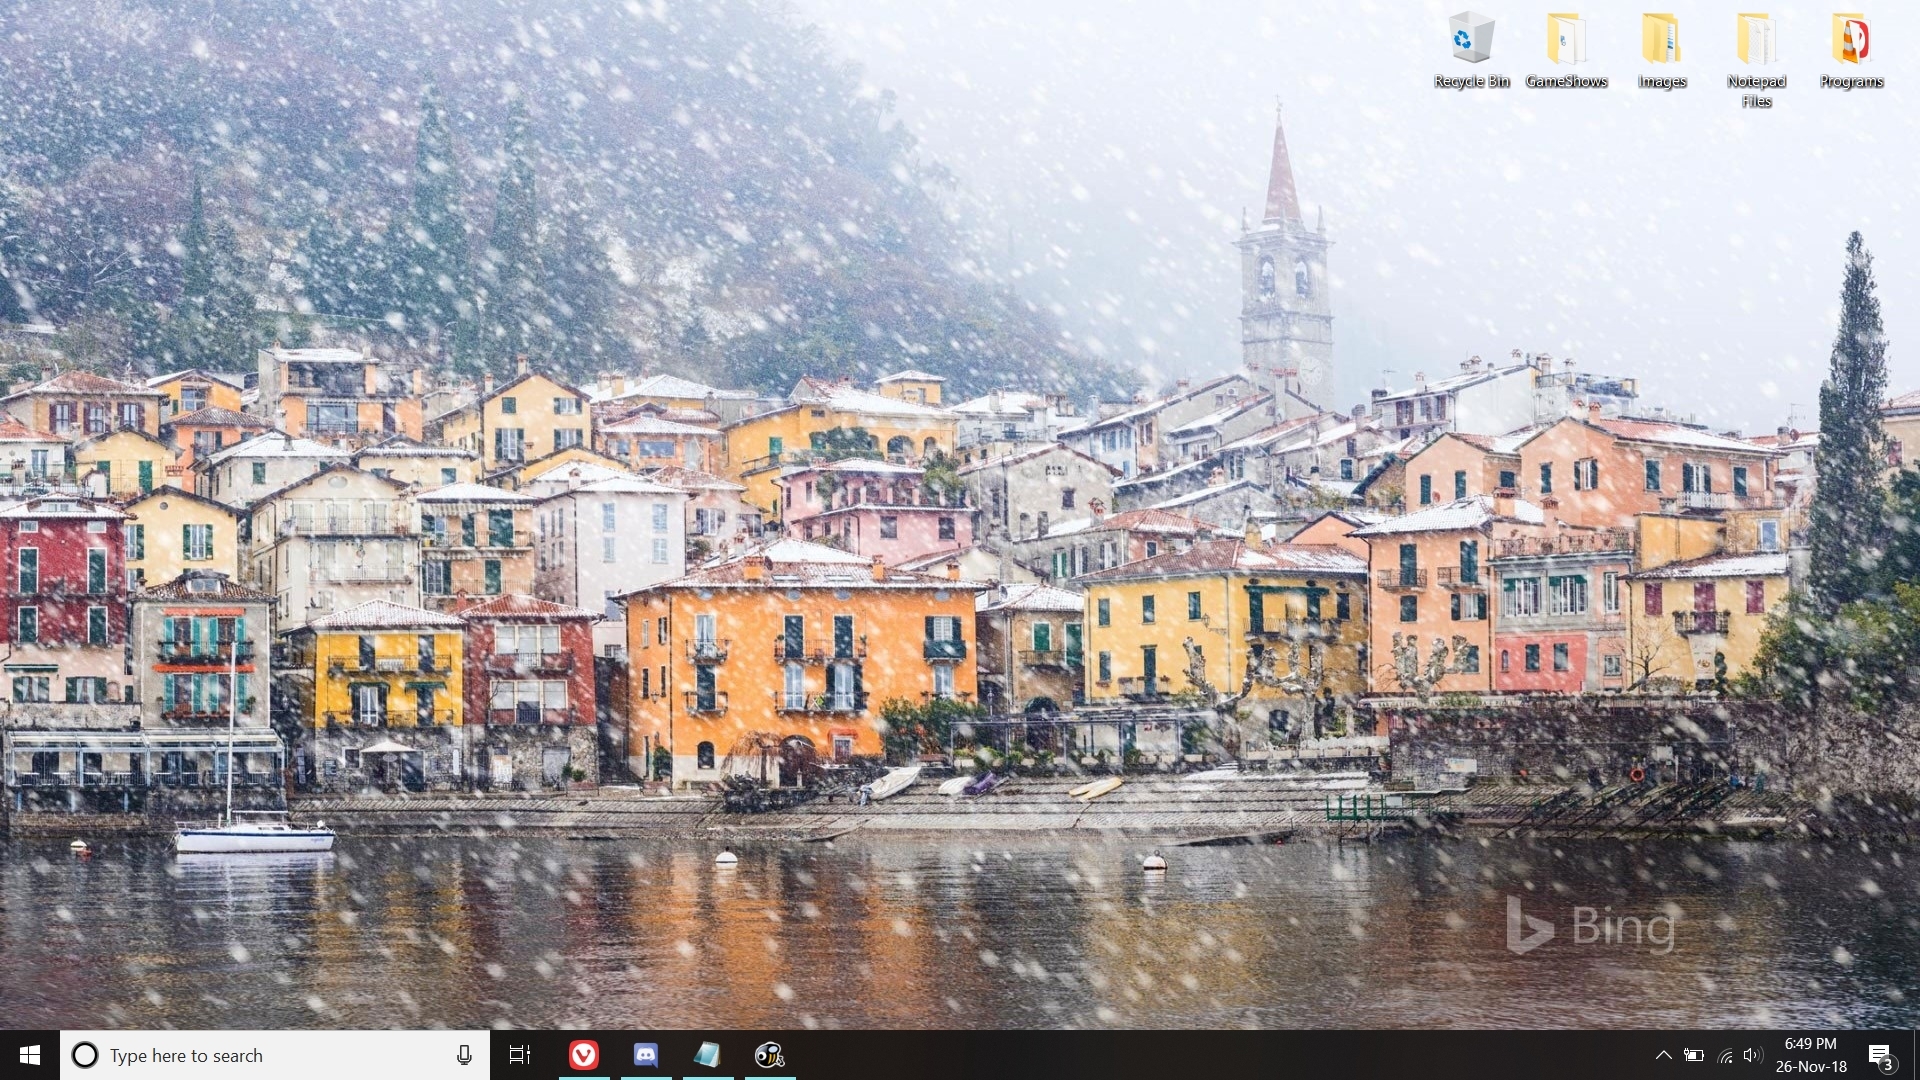 What is your current desktop/mobile background?